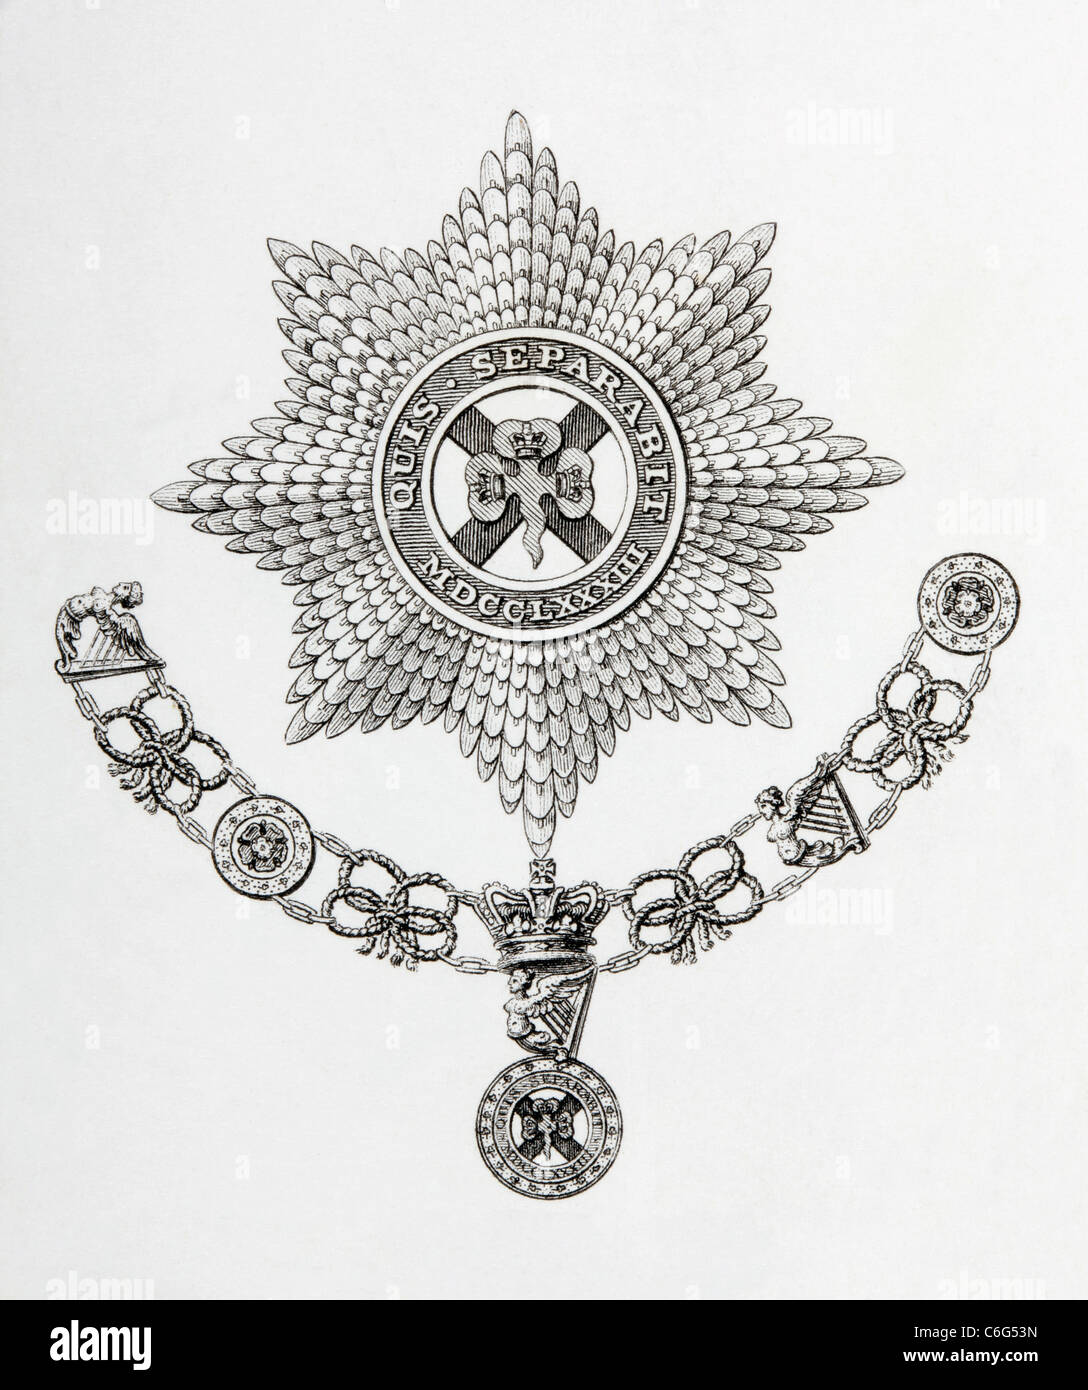 Star, Collar and Badge of the Order of St. Patrick. Stock Photo